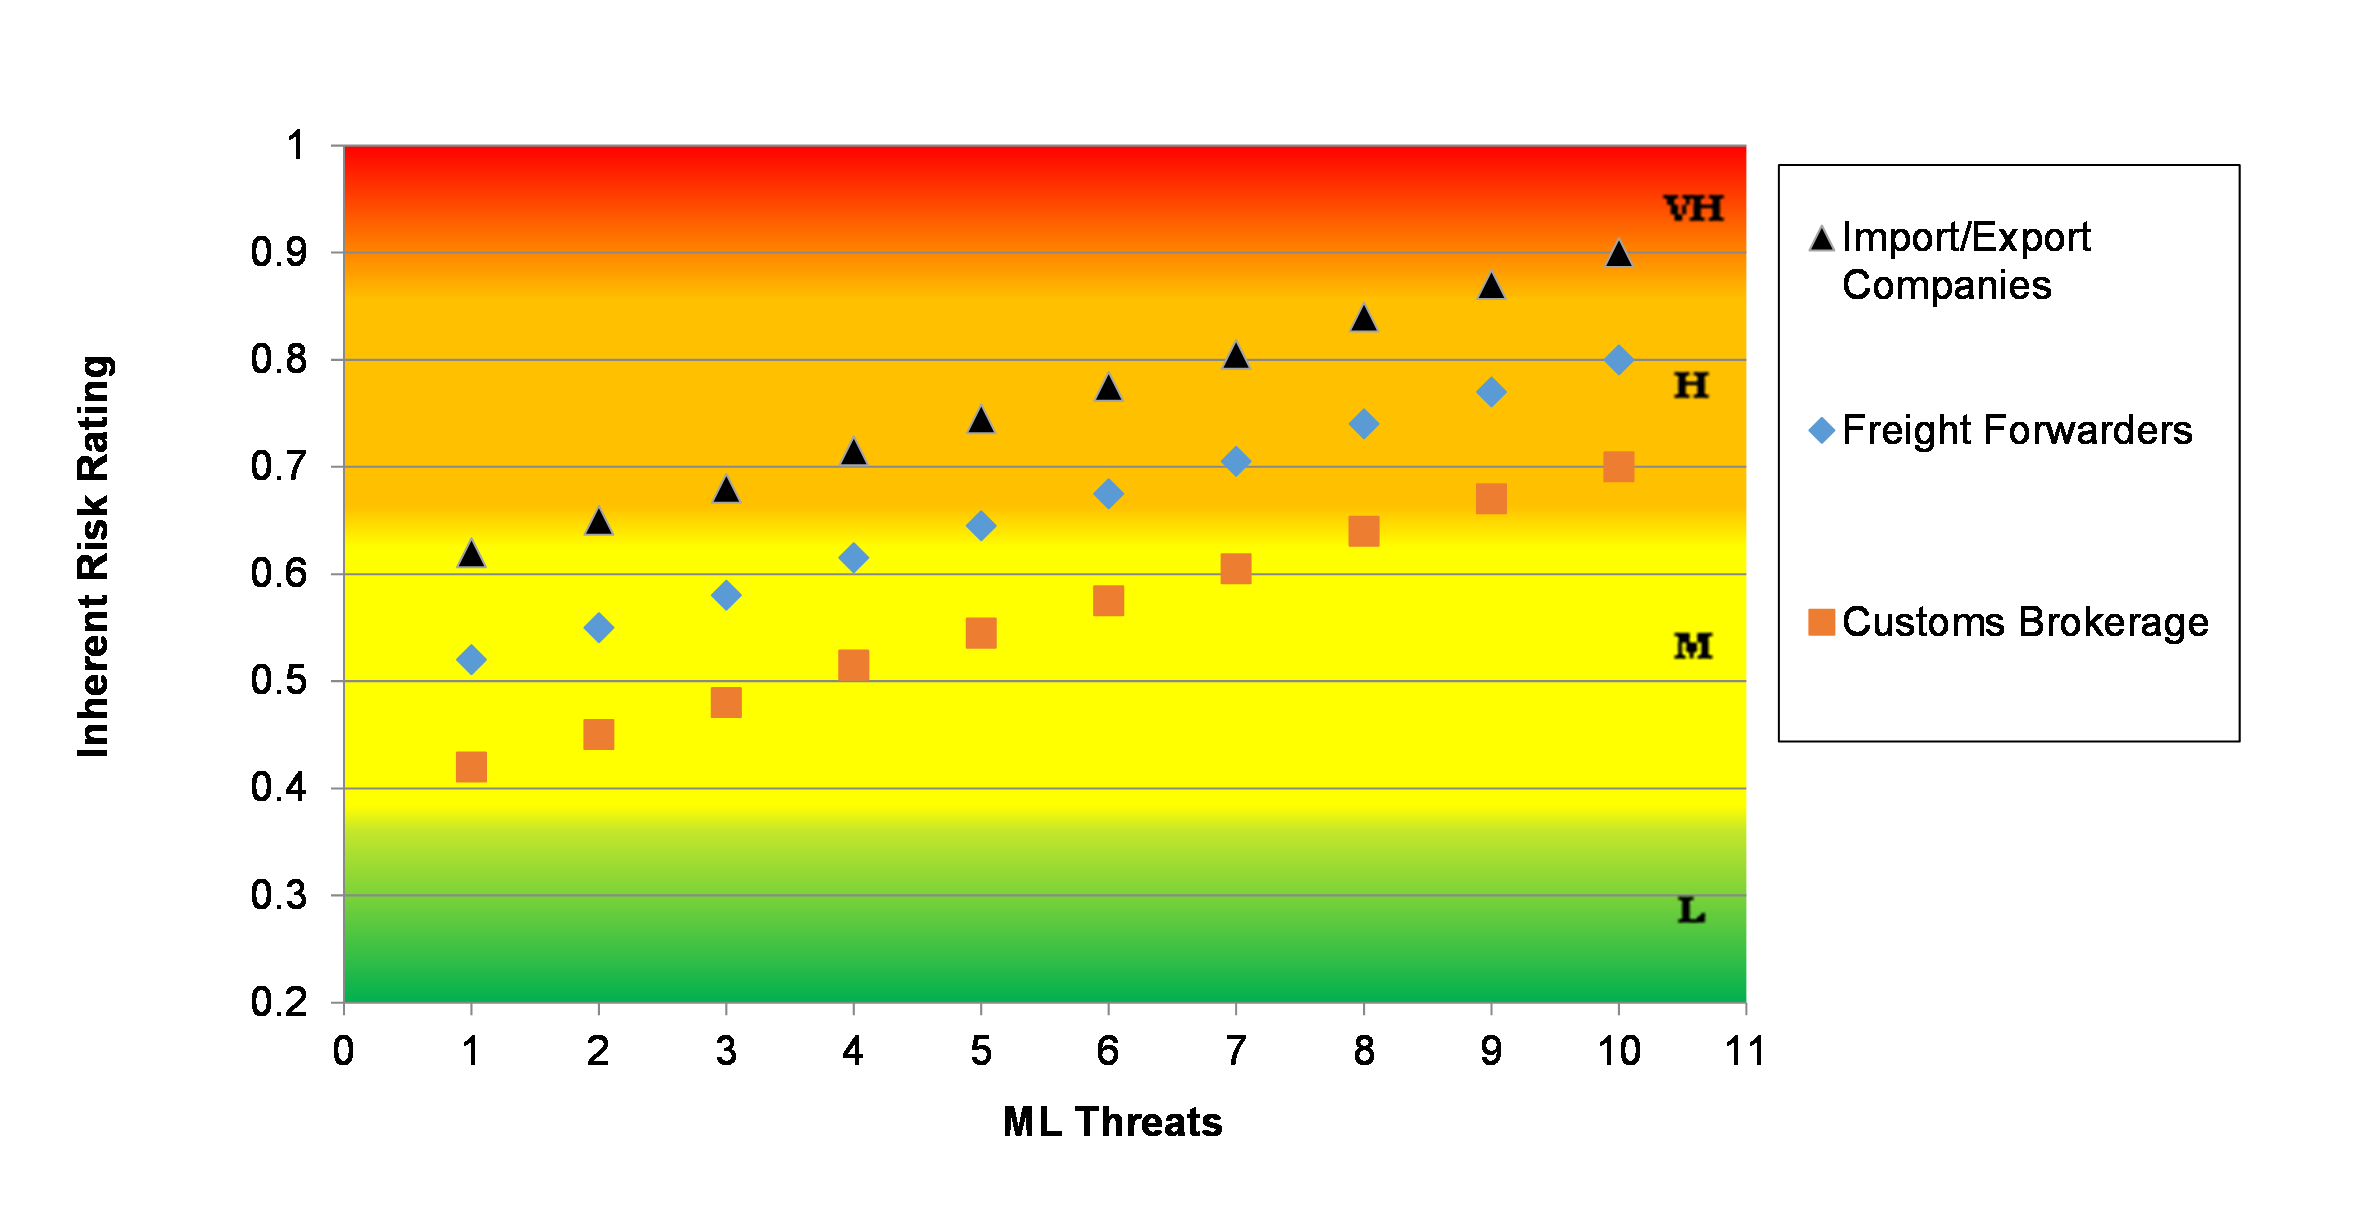 Figure 9: Inherent ML Risks related to the Commercial Trade Sector by Type of ML Threats